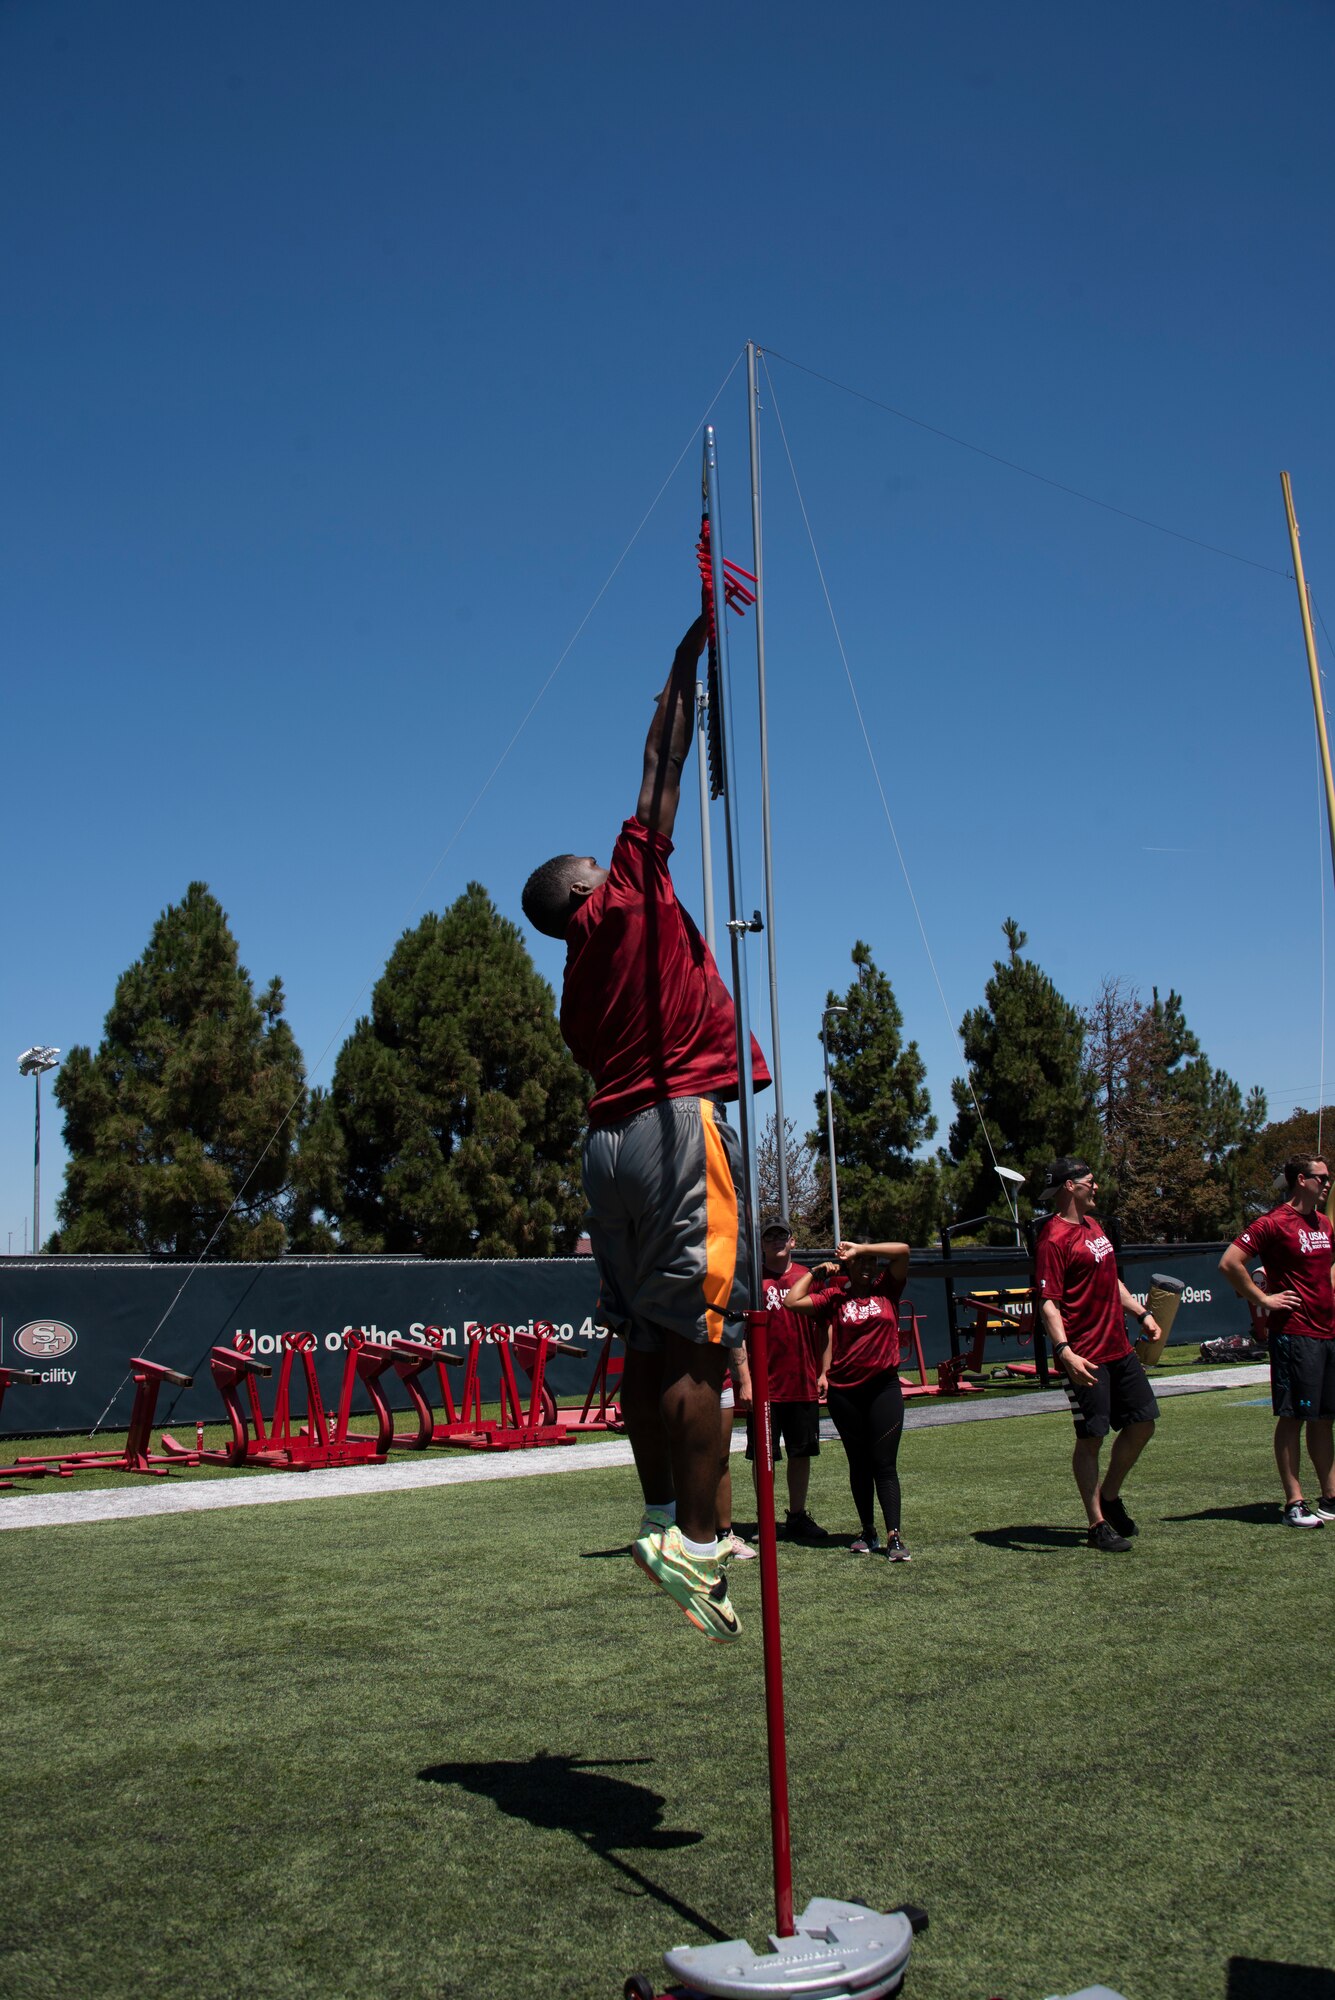 A U.S. Airman from Travis Air Force Base, California, competes in the vertical jump Aug. 13, 2019, during the Salute to Service Boot Camp in Santa Clara, California. The event provided Airmen with an opportunity to interact with NFL players and compete against one another in a variety of athletic drills. (U.S. Air Force photo by Tech. Sgt. James Hodgman)